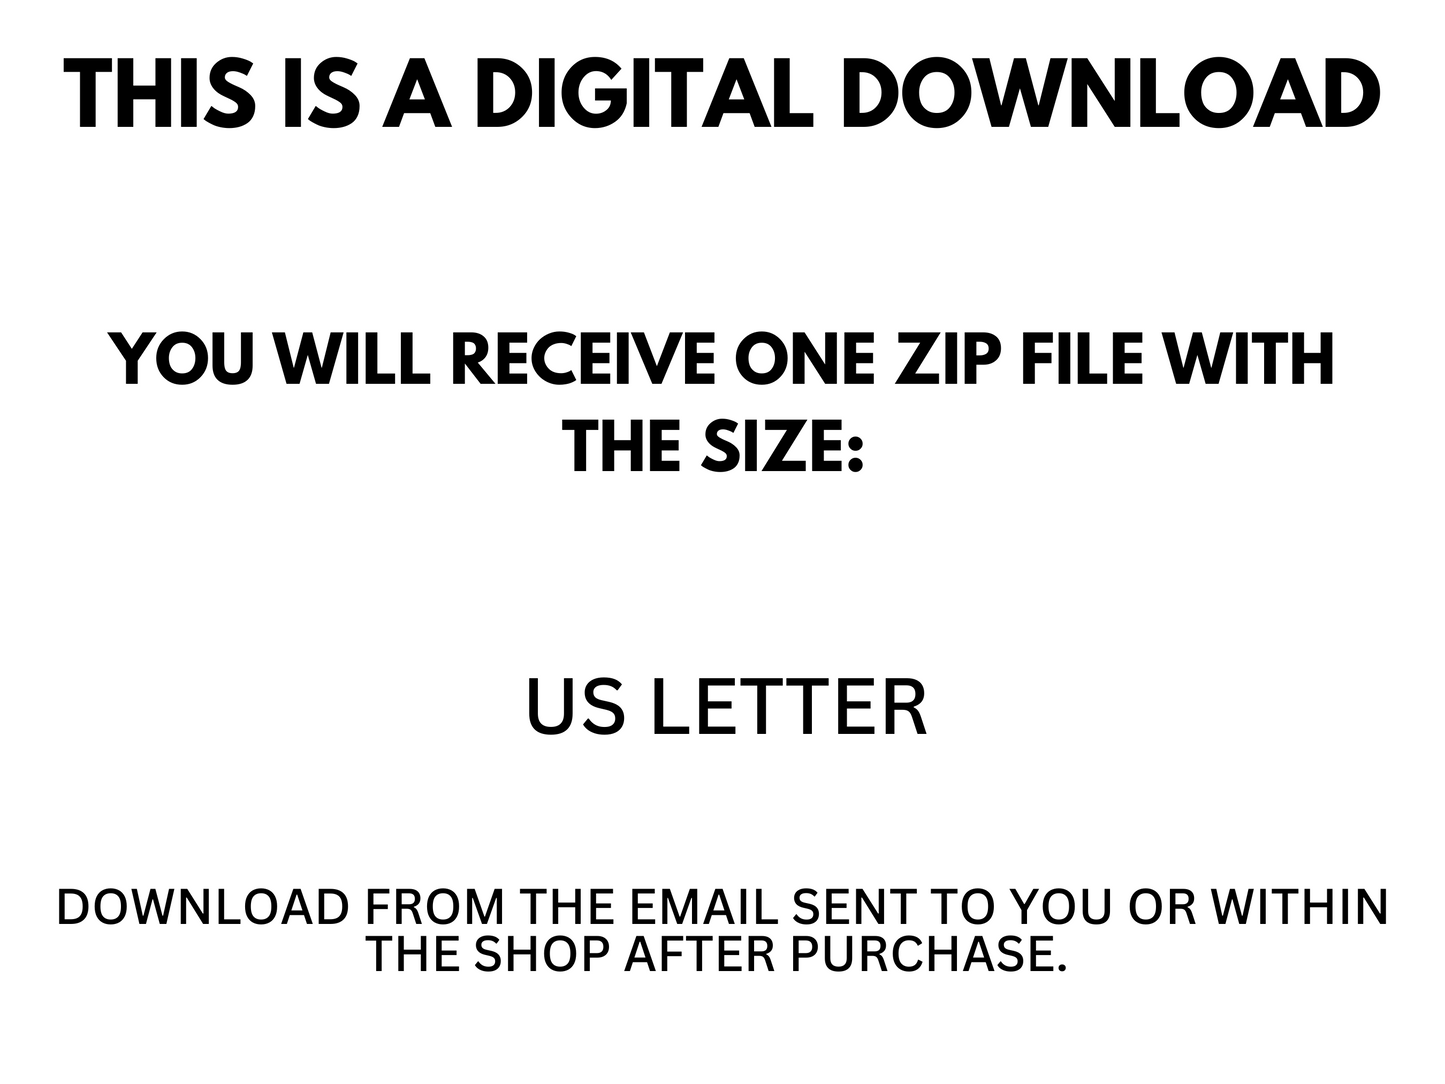 A state about the product being a digital download on US letter.